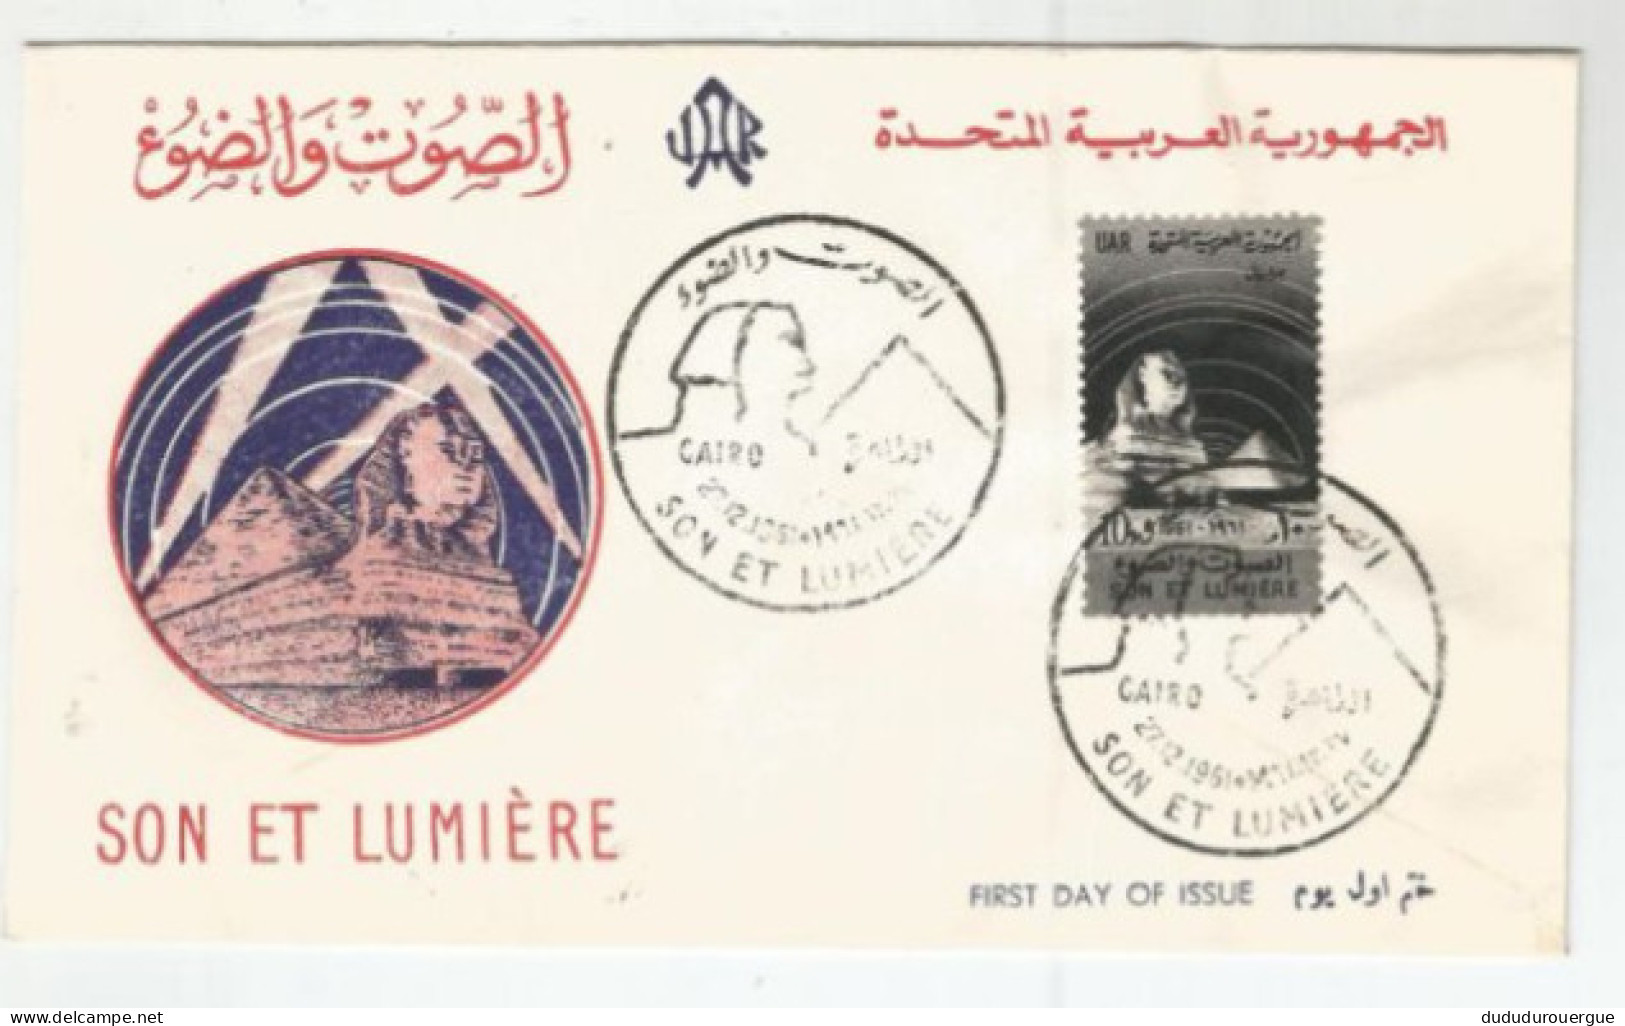 EGYPT , Son Et Lumiere , FIRST DAY OF ISSUE - Covers & Documents